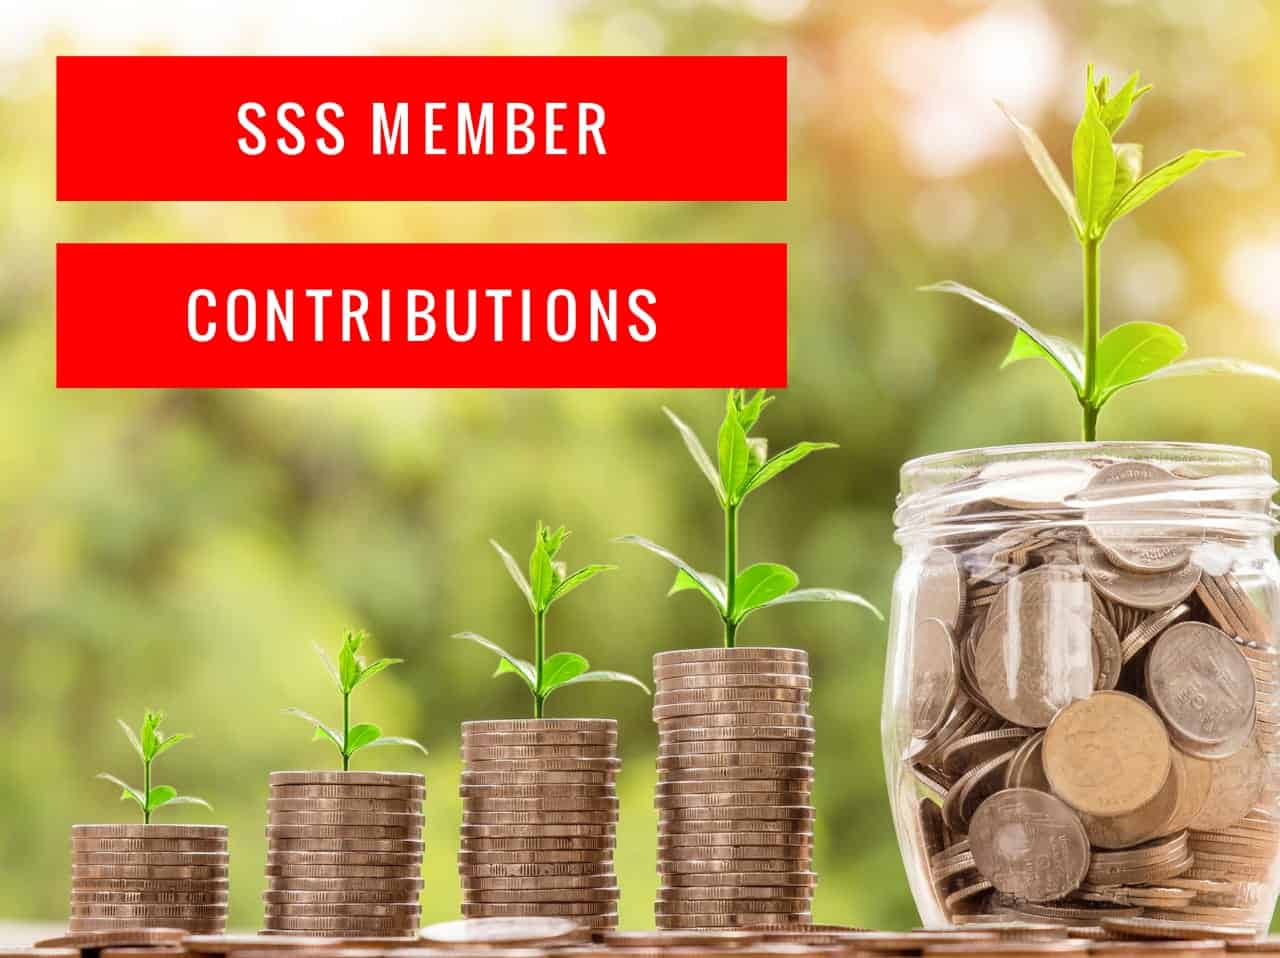 Online inquiry for SSS member contributions.